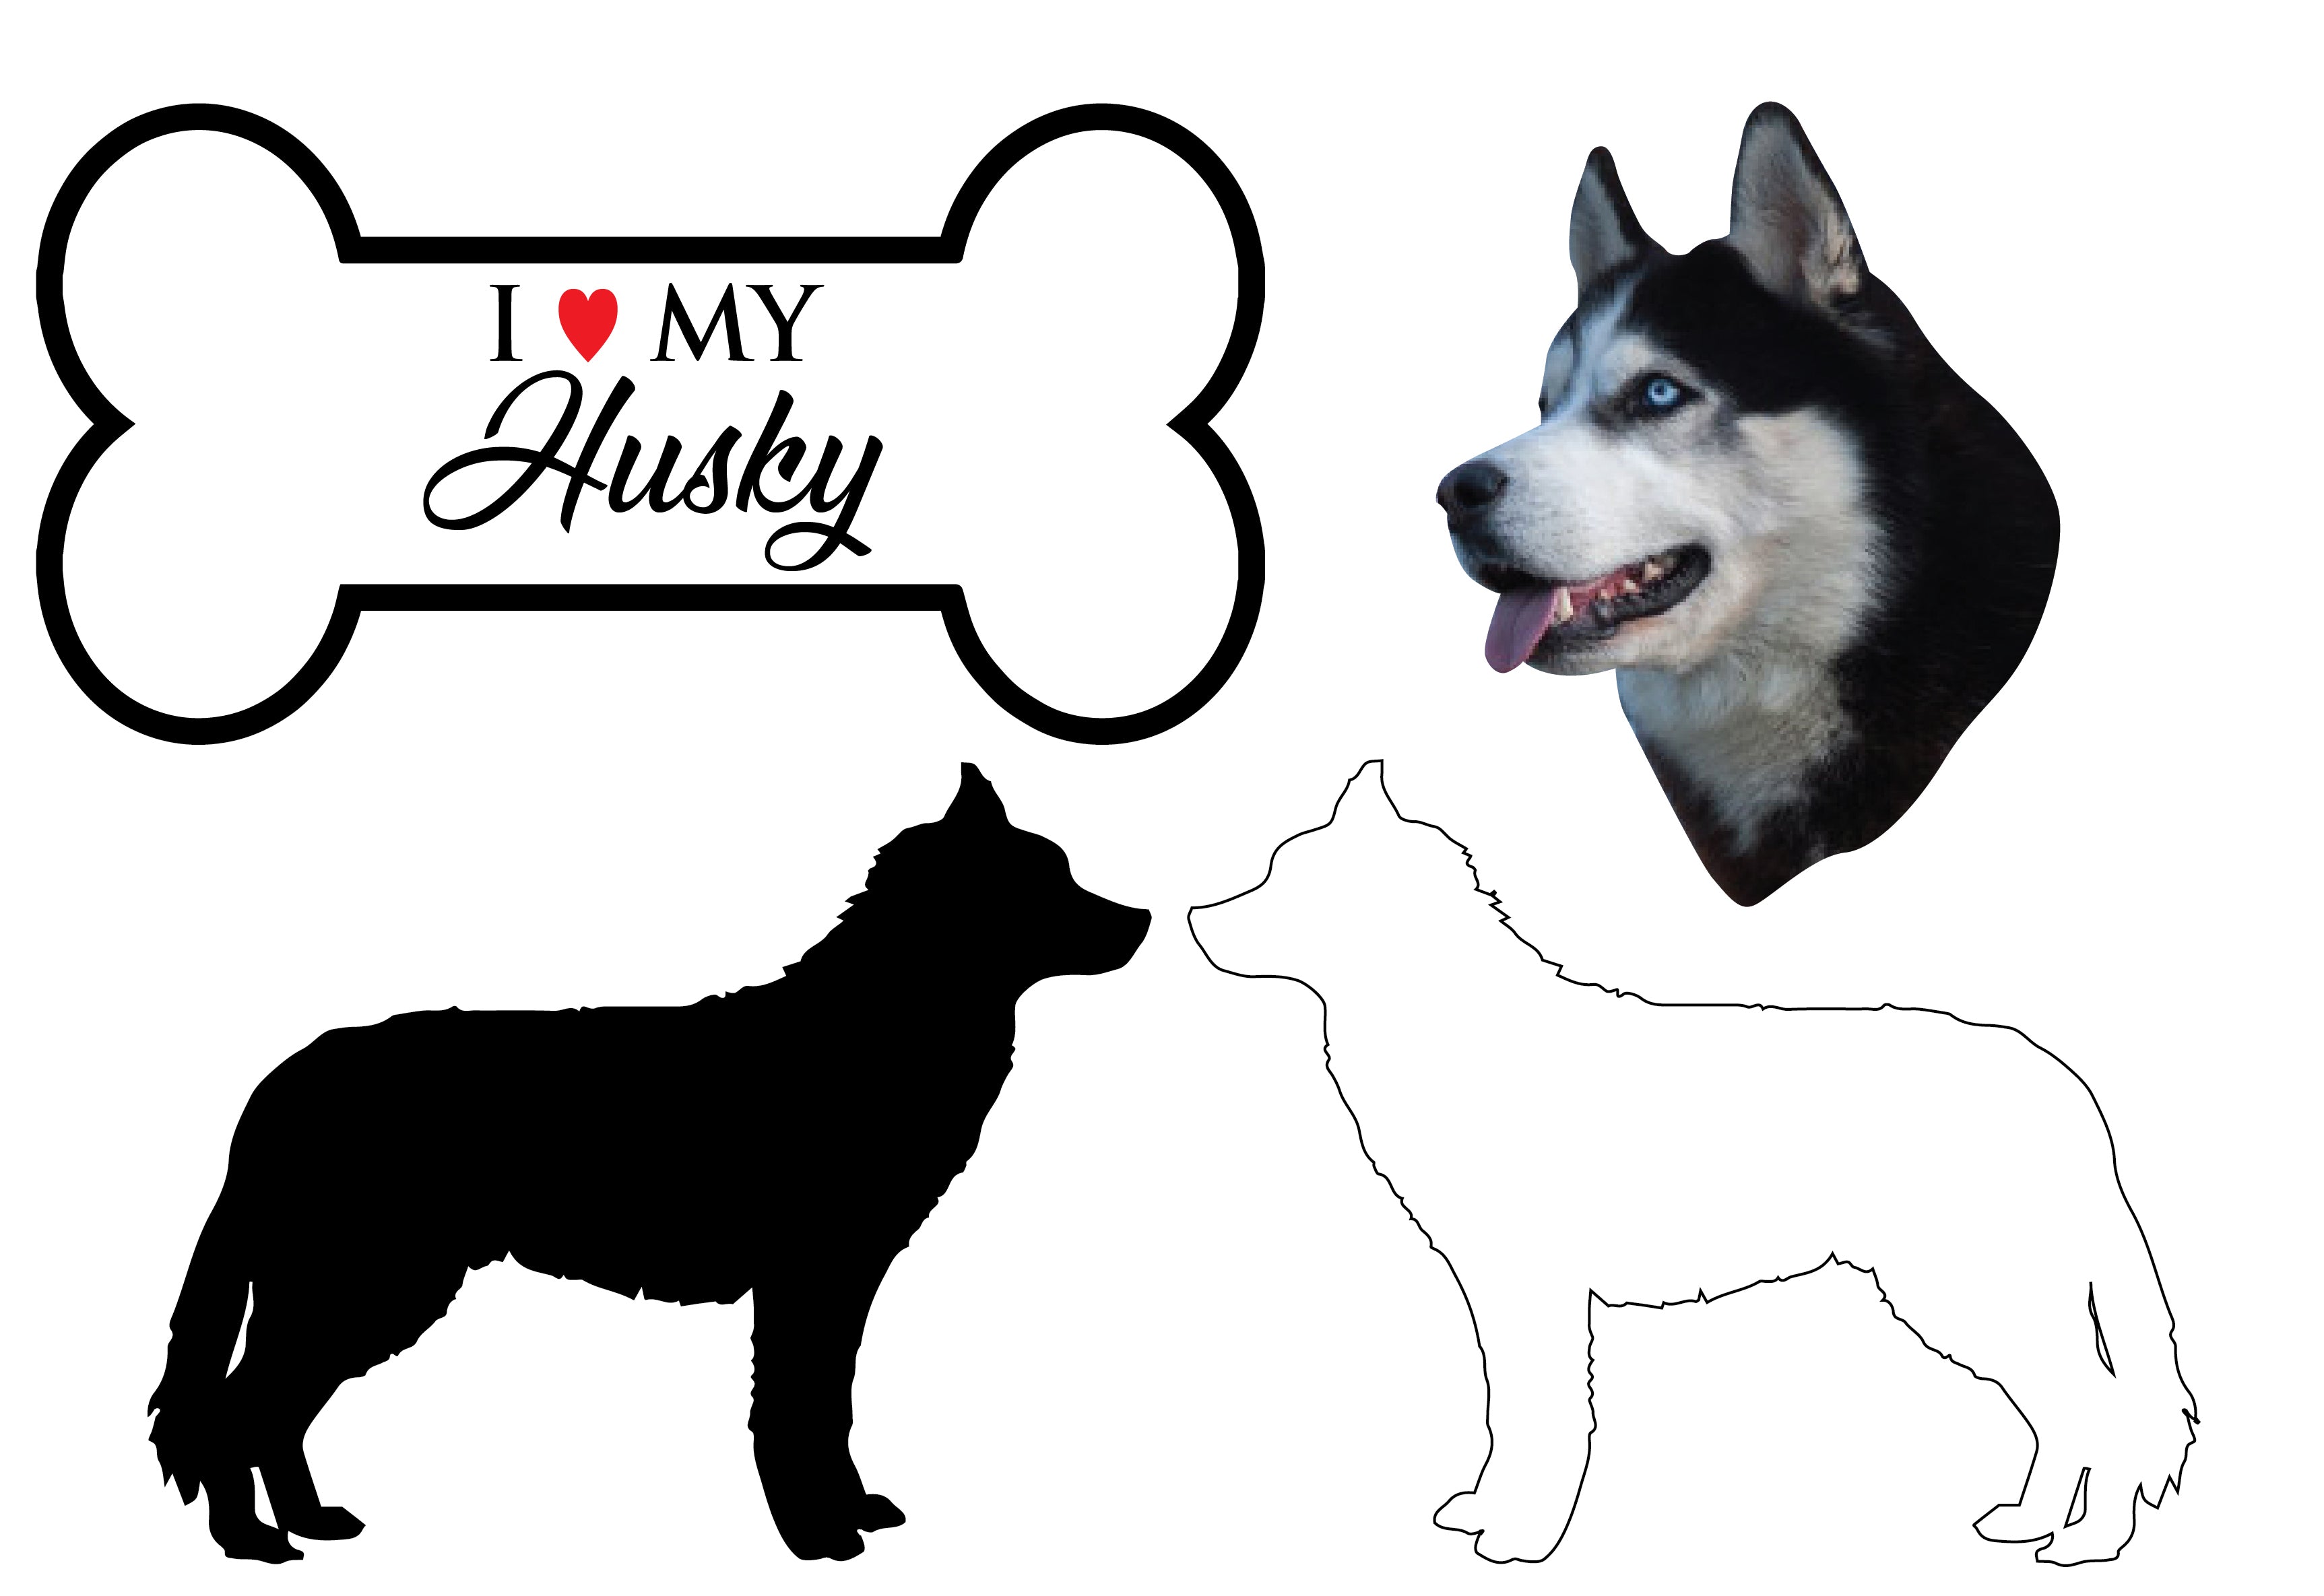 Husky - Dog Breed Decals (Set of 16) - Sizes in Description